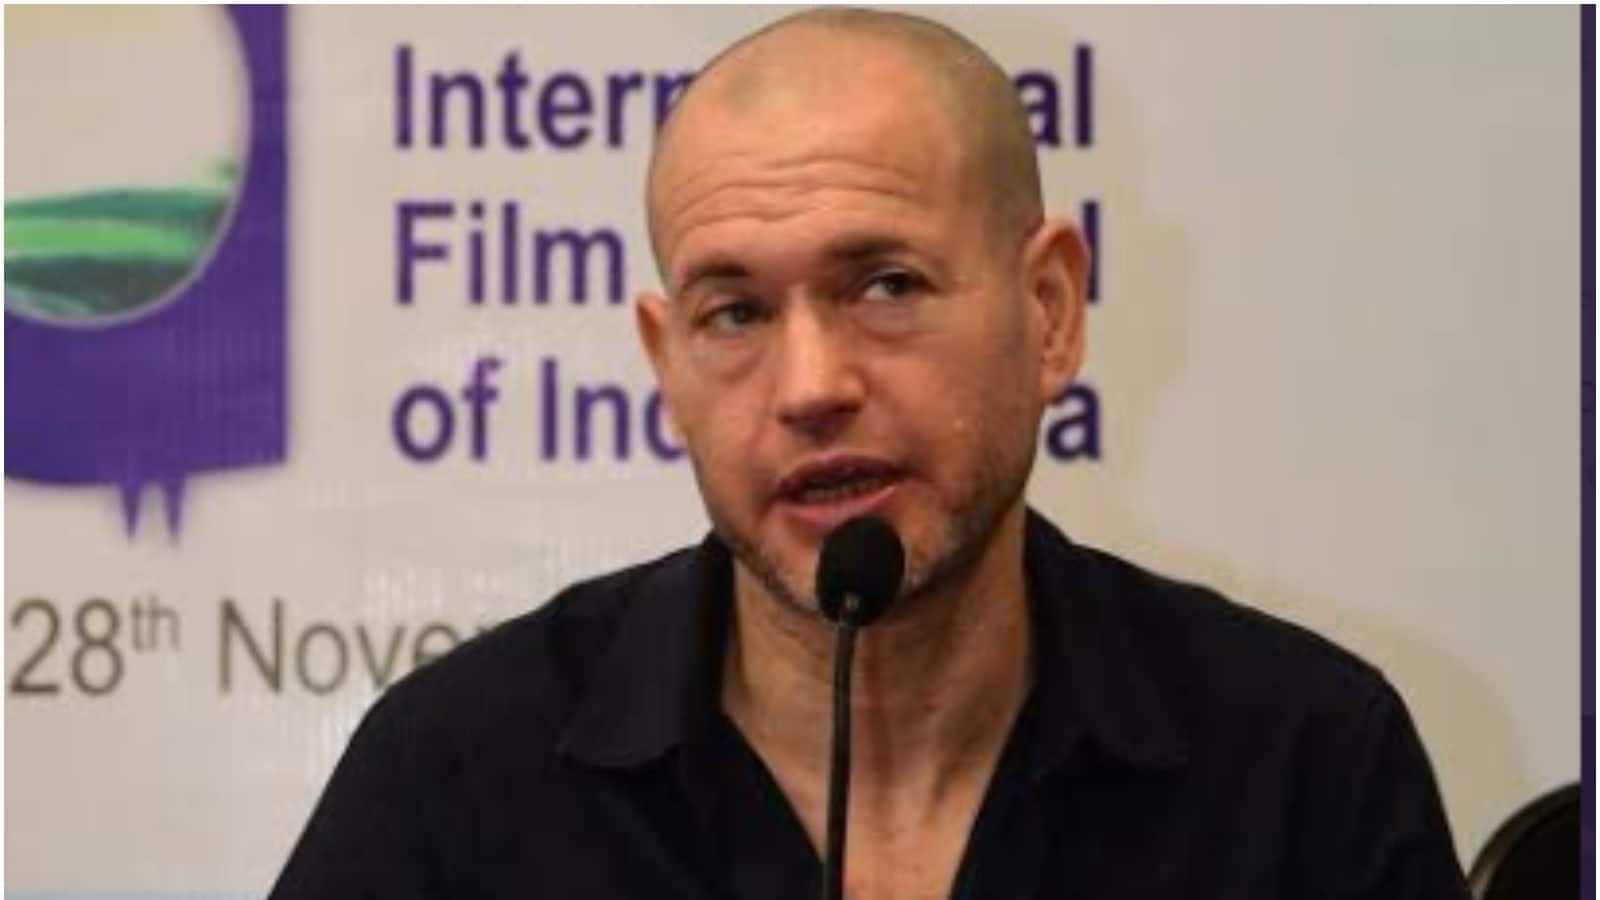 ‘You should be ashamed’: In open letter, Israeli envoy condemns IFFI jury chief Lapid’s comments on ‘Kashmir files’